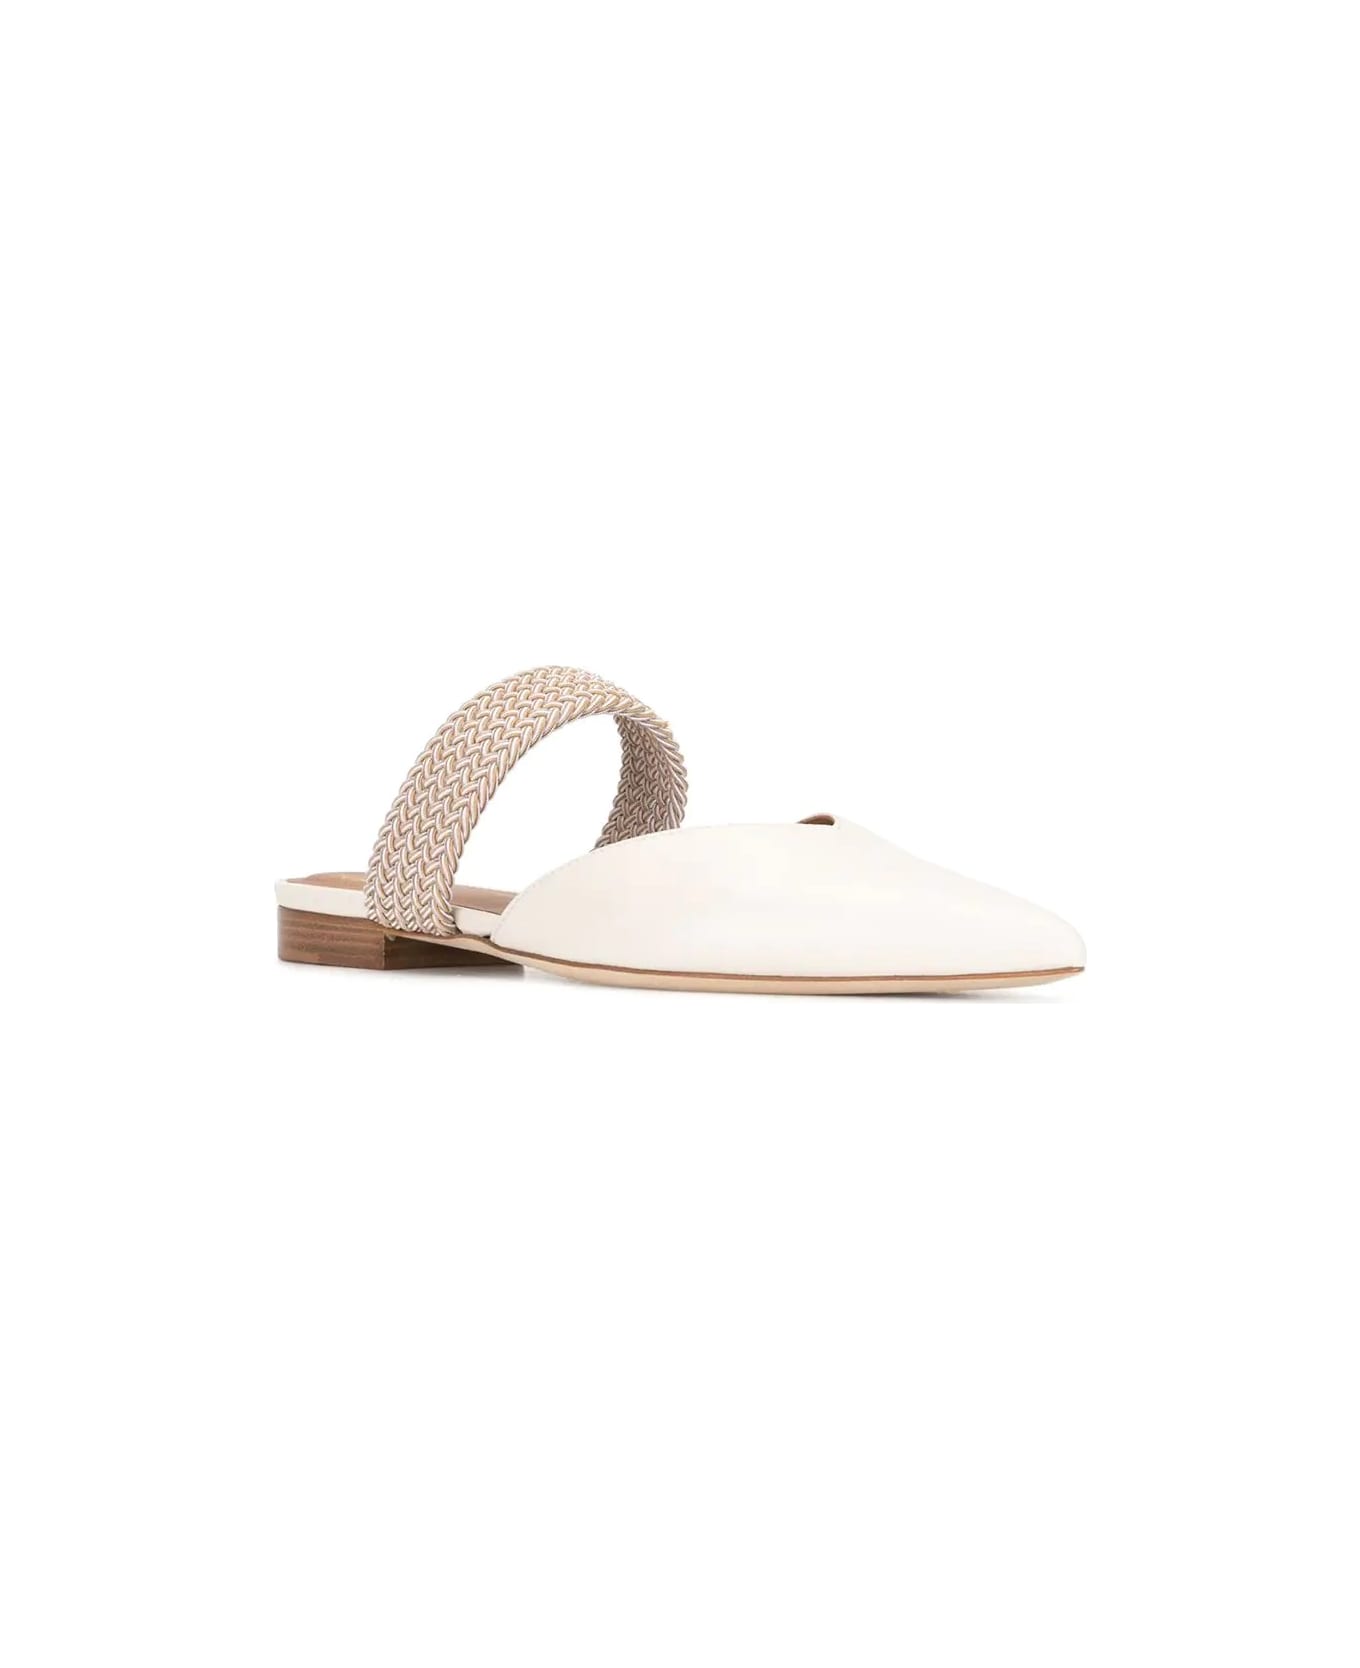 Malone Souliers Maisie Flat - Crm Cream